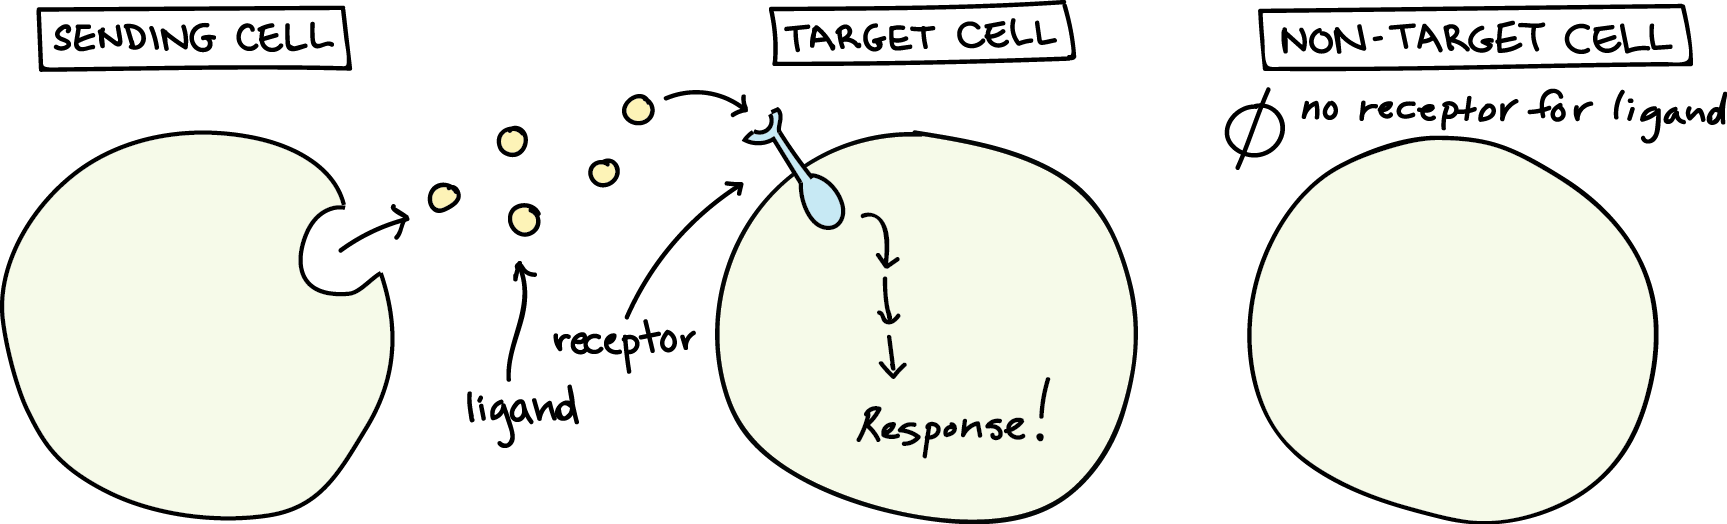 Cell signaling overview